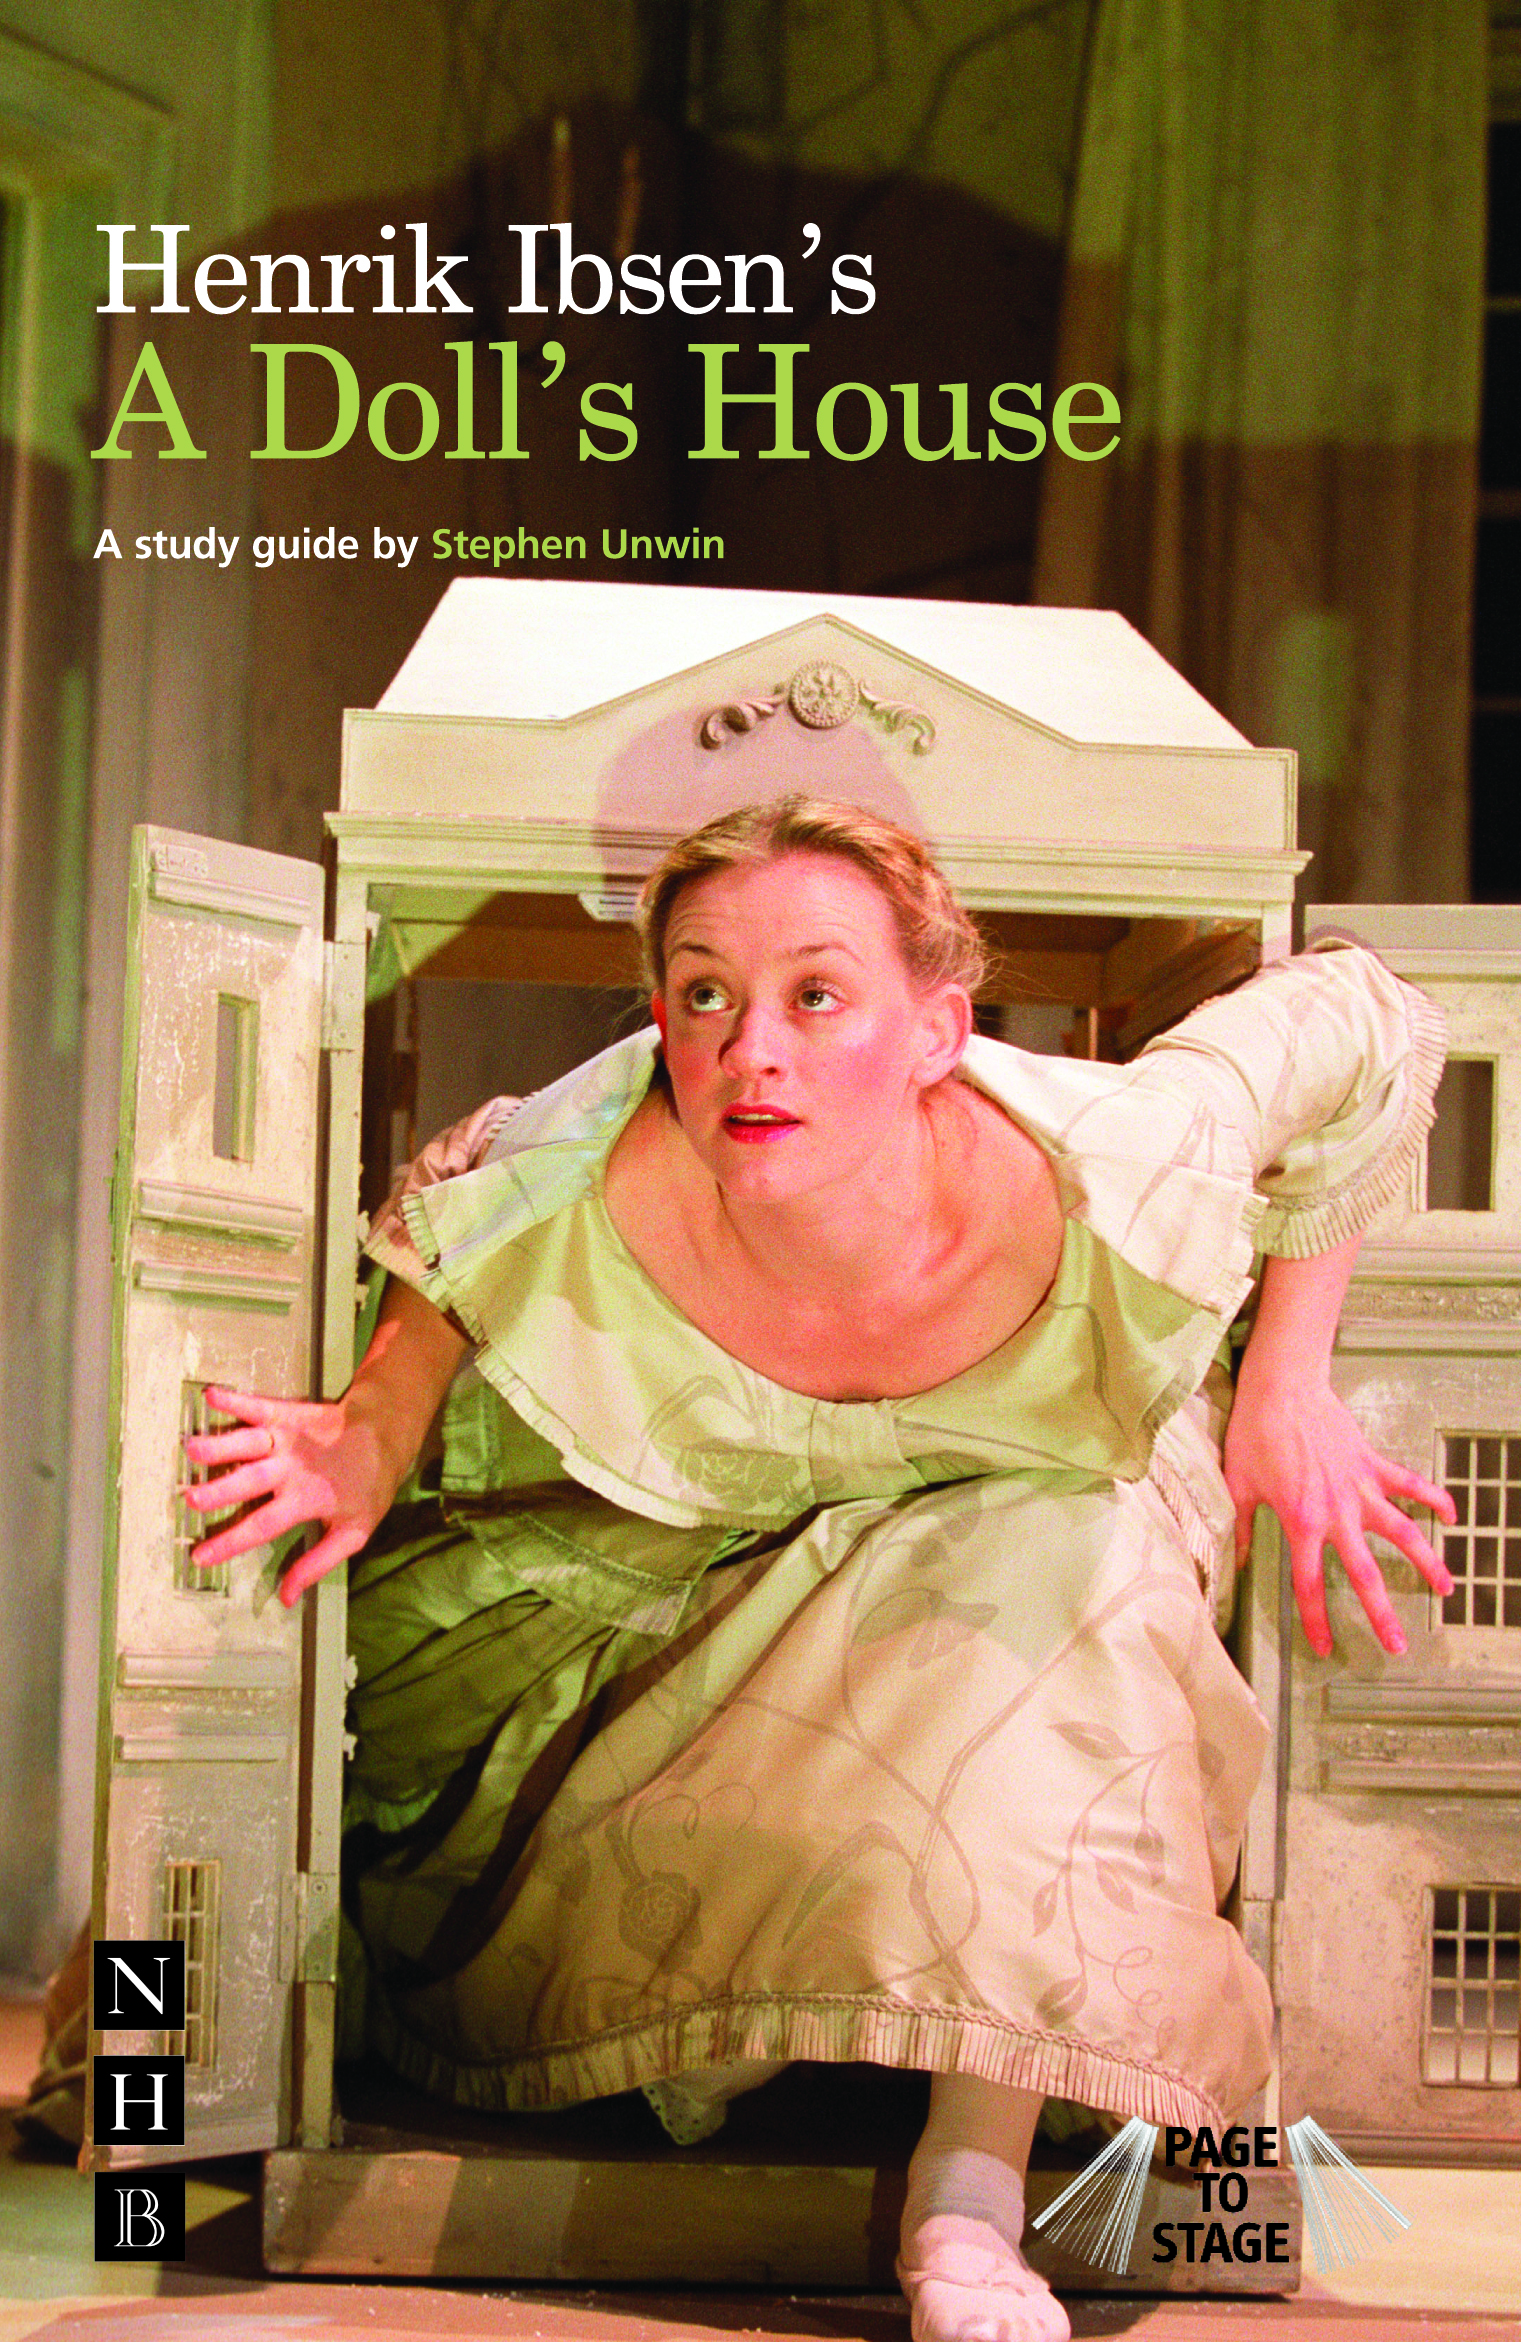 book review of a doll's house sample